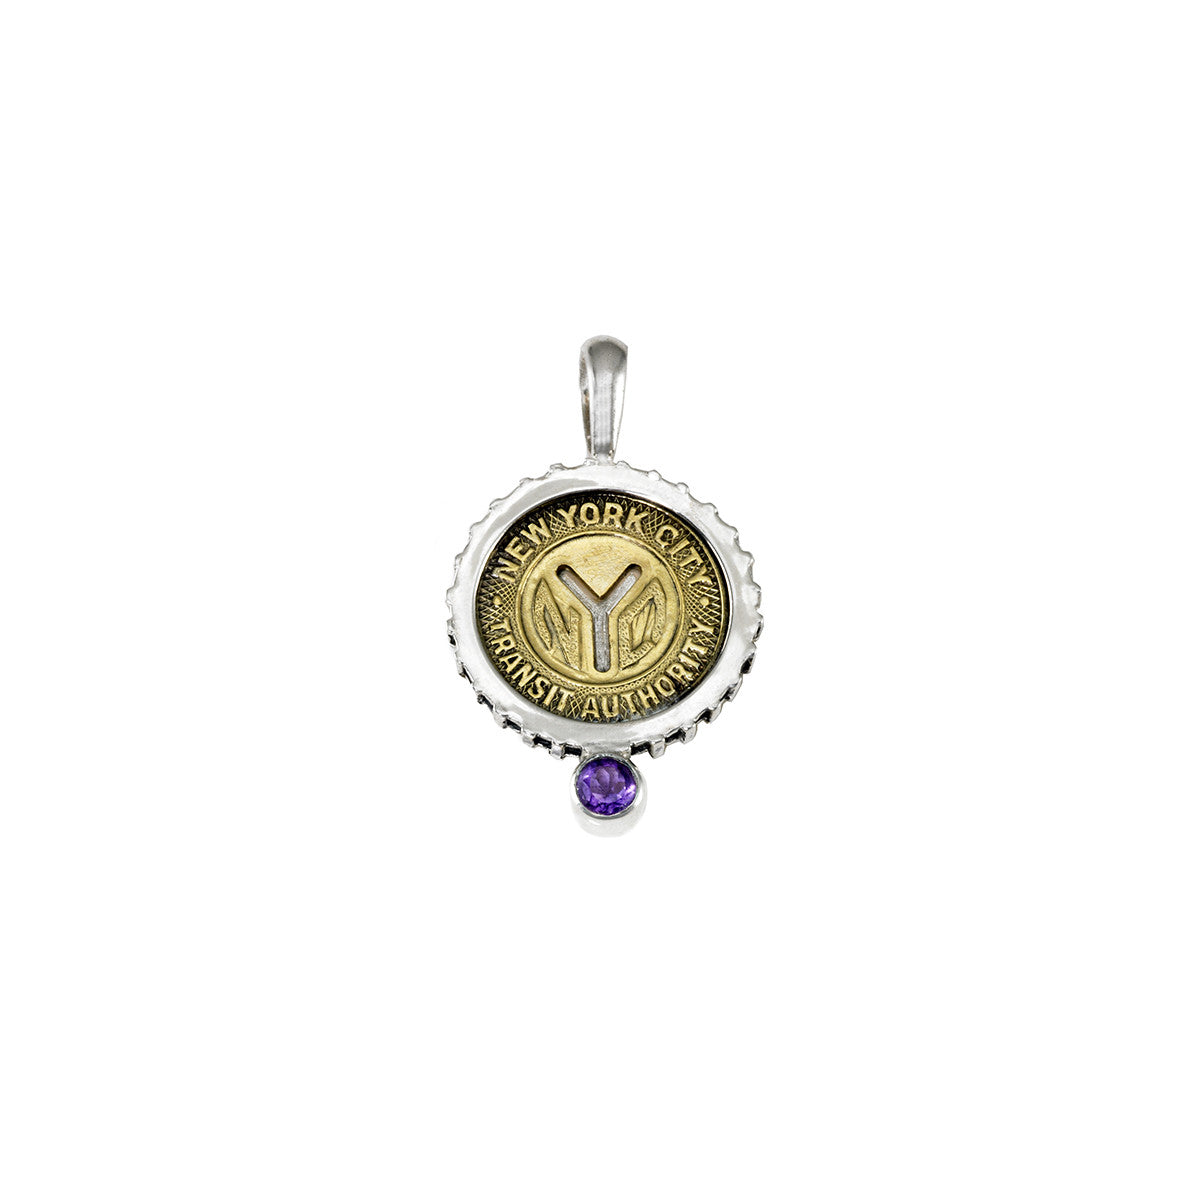 February NYC Authentic Subway Token Amethyst Sterling Silver Charm Necklace - Cynthia Gale New York - 1